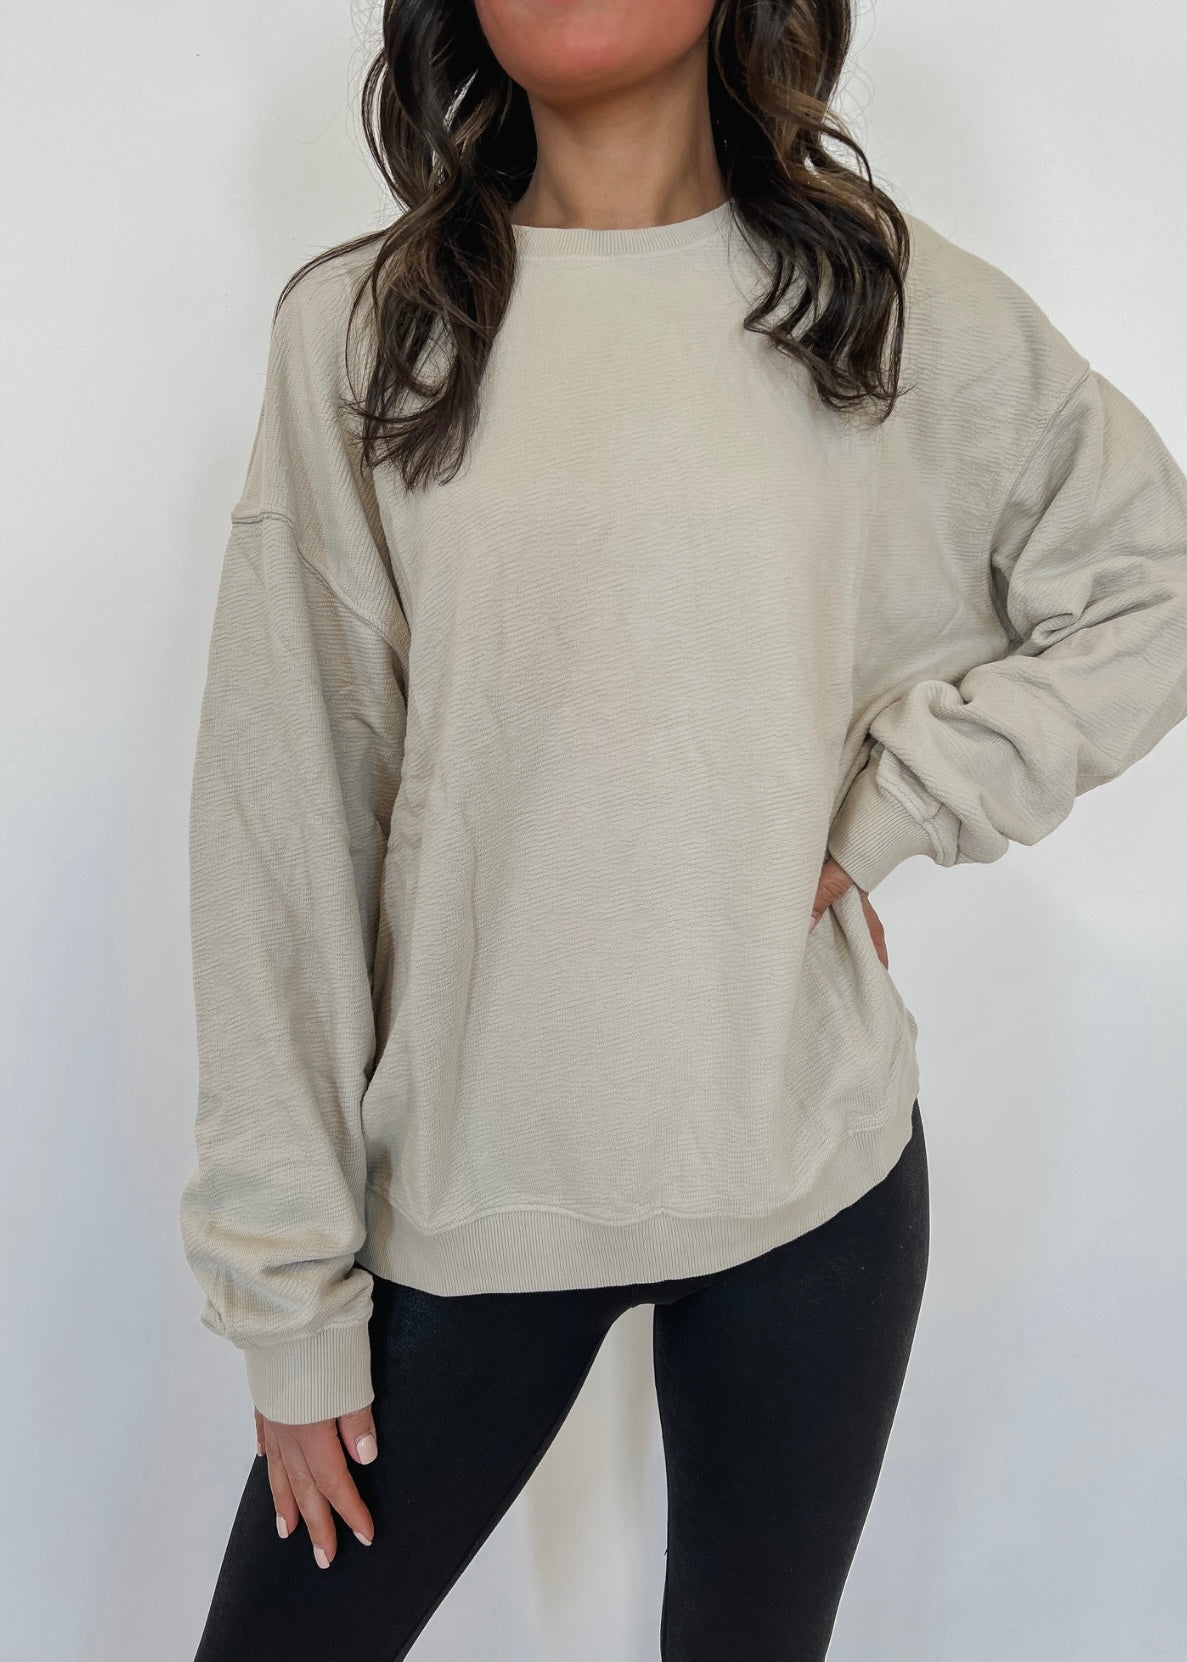 Mineral Washed jacquard Pullover - TAUPE